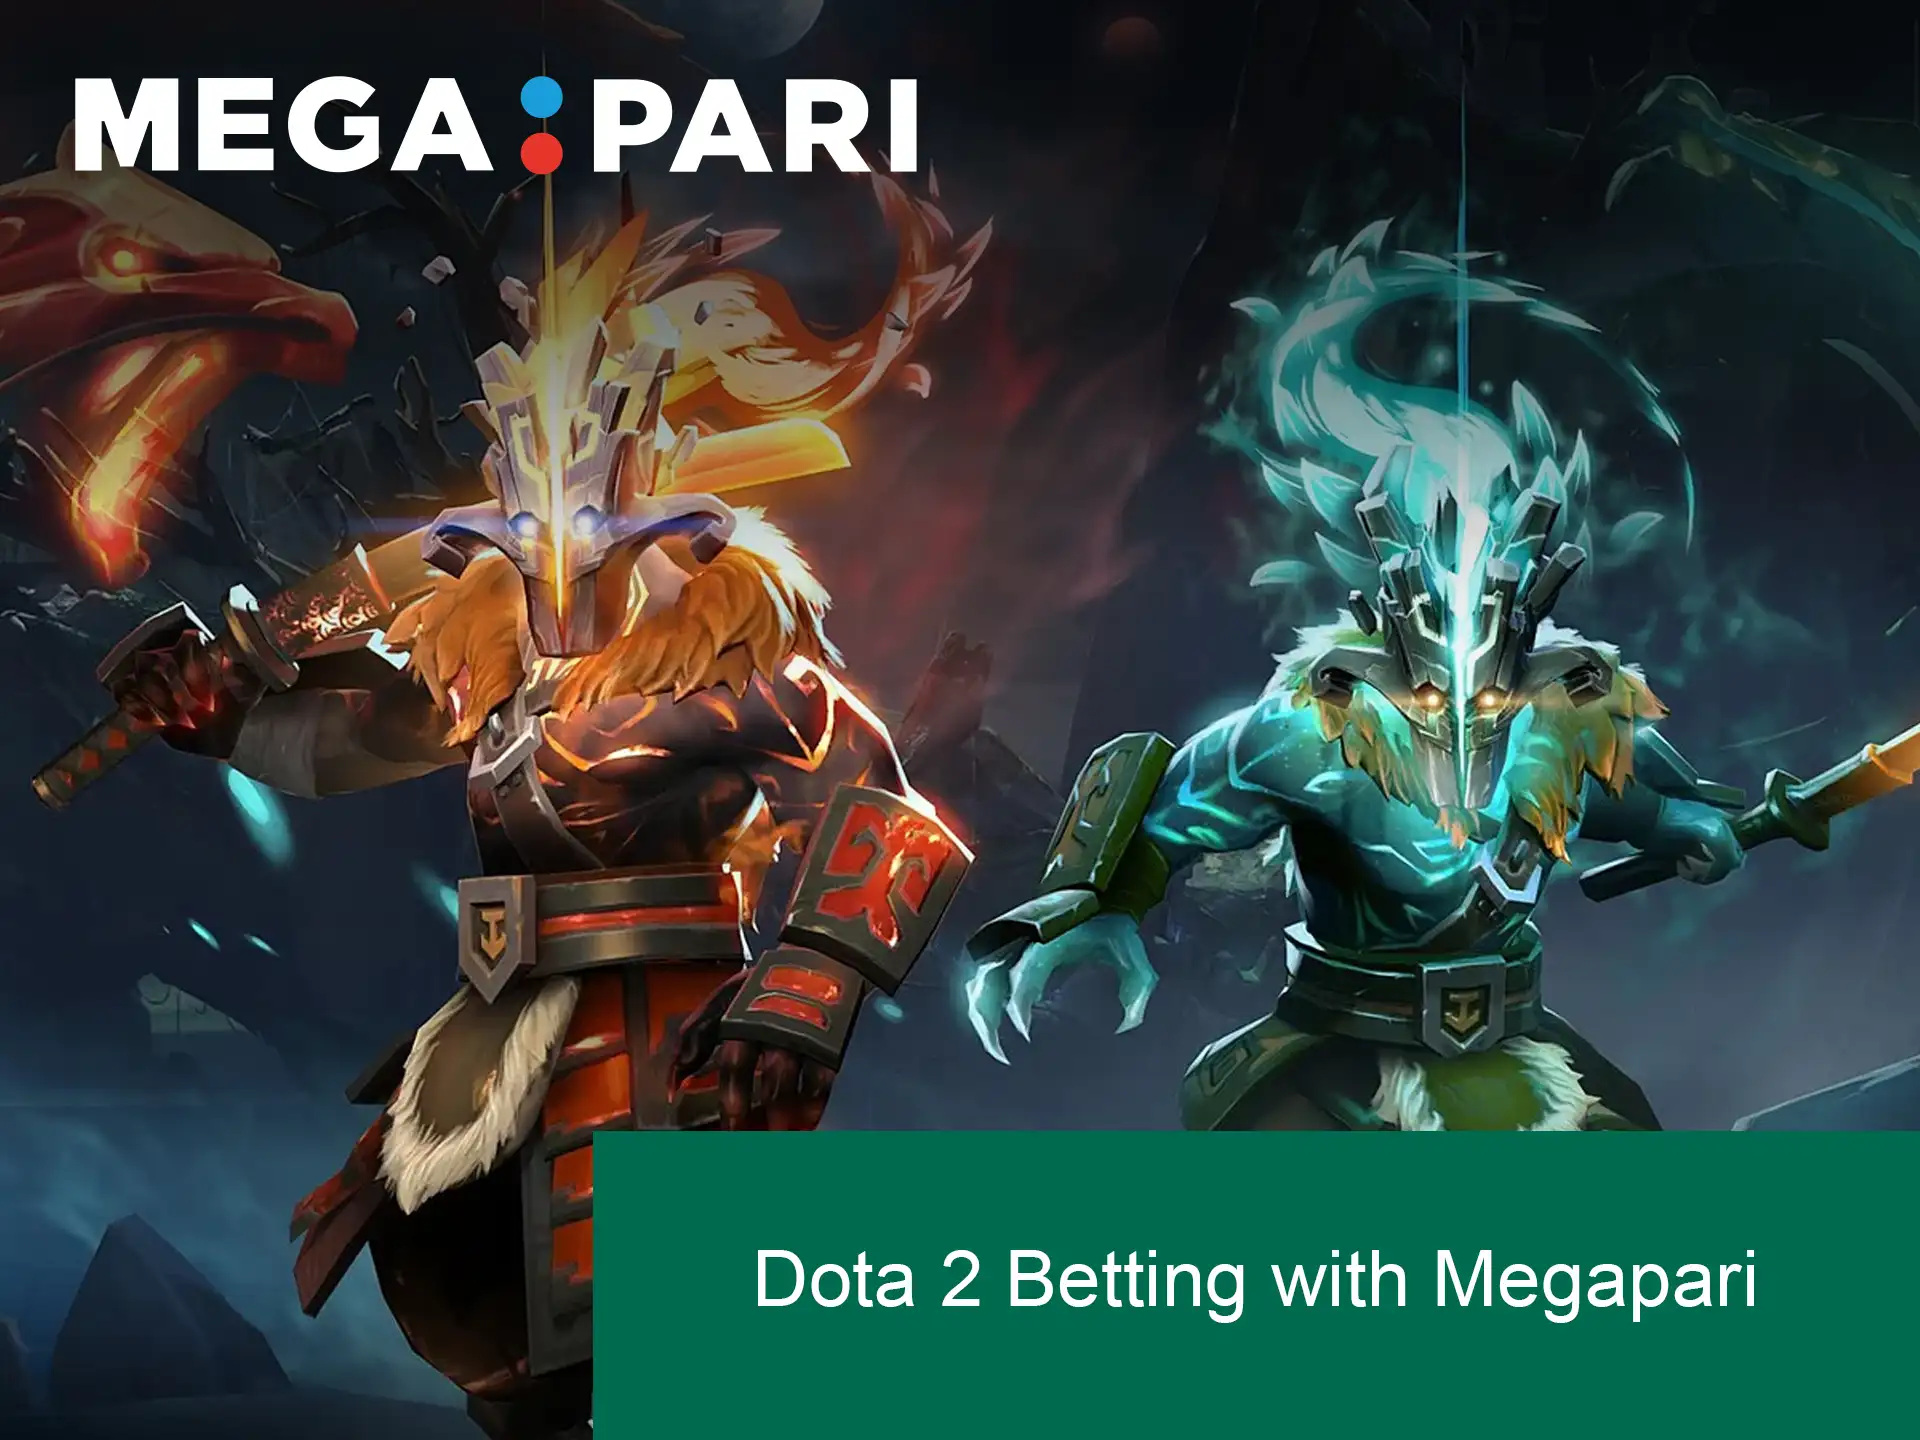 At Megapari Bangladesh you can bet on Dota 2 and many other cyber sports disciplines.